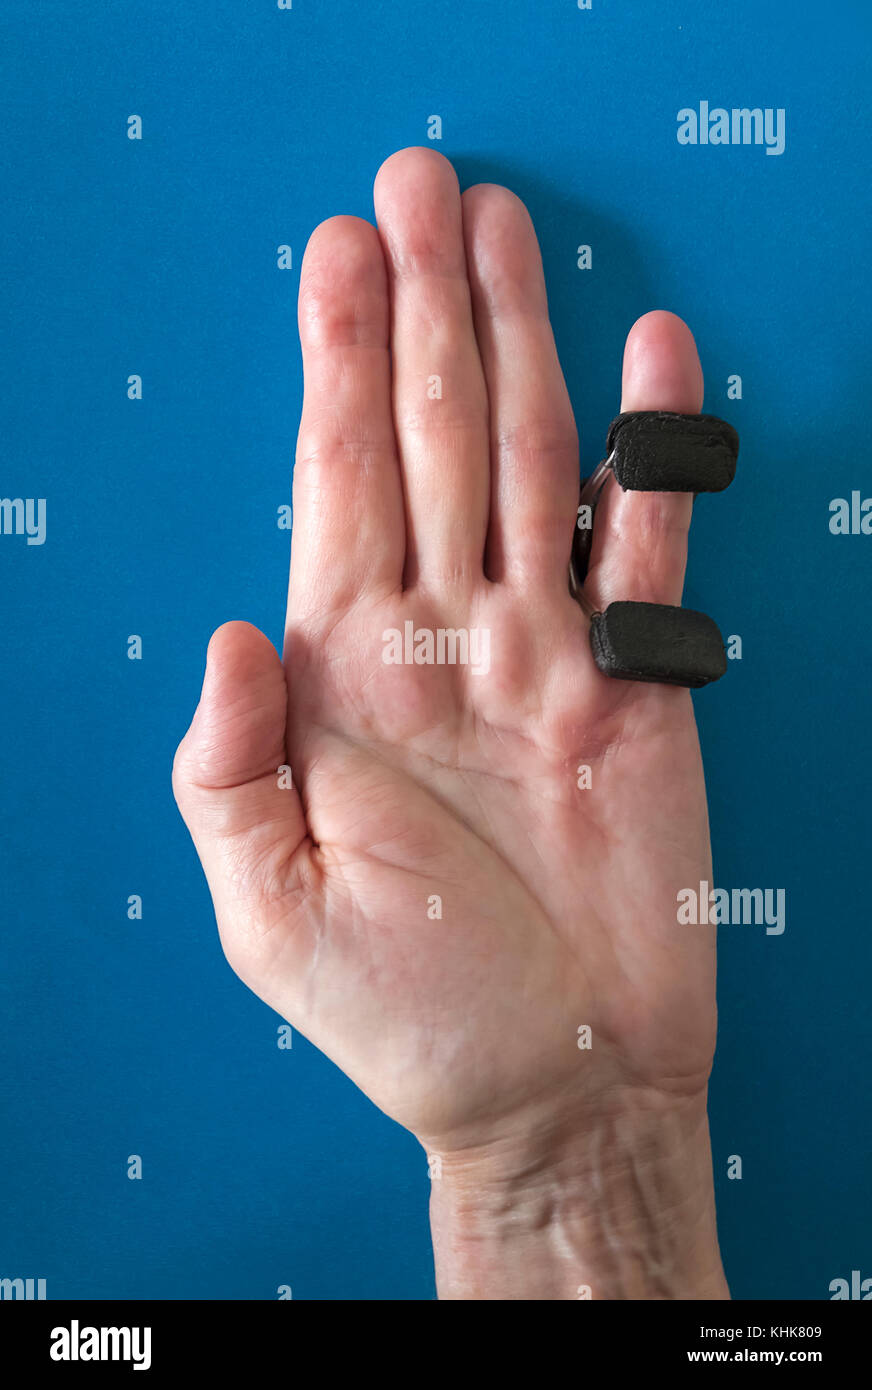 Finger splint on a little 'pinkie' finger after Dupuytren's Contracture corrective surgery to straighten finger and remove scar tissue. Stock Photo